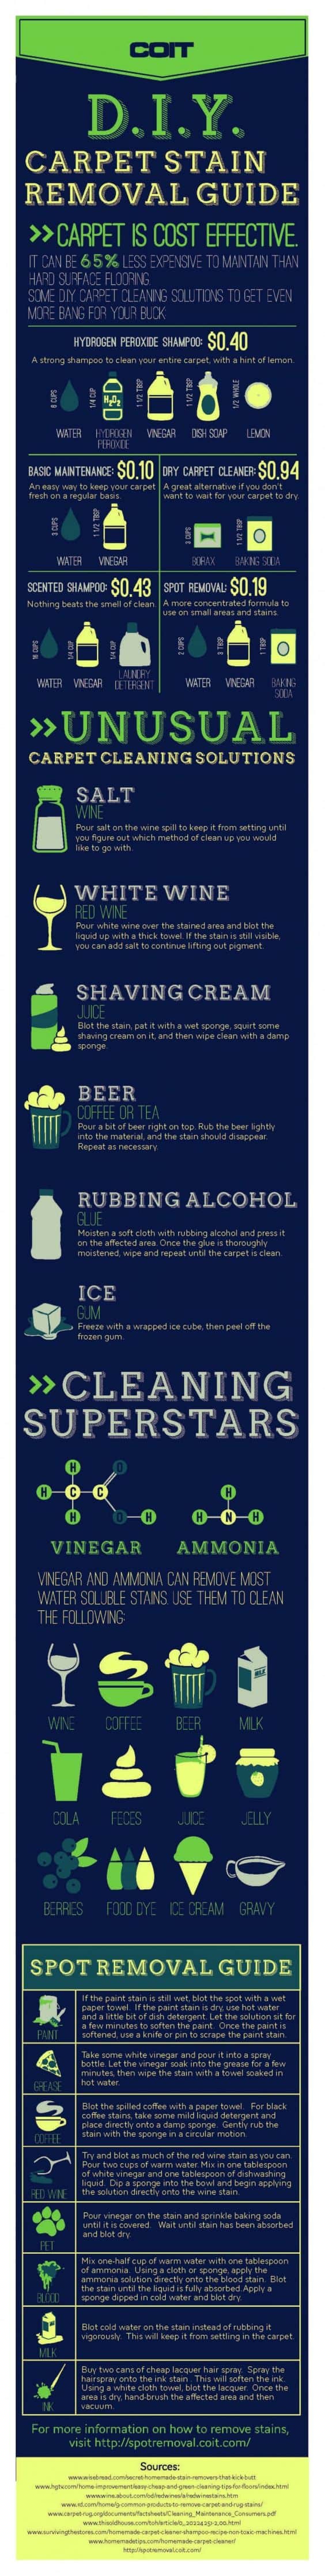 infographic describes How to remove any carpet stain